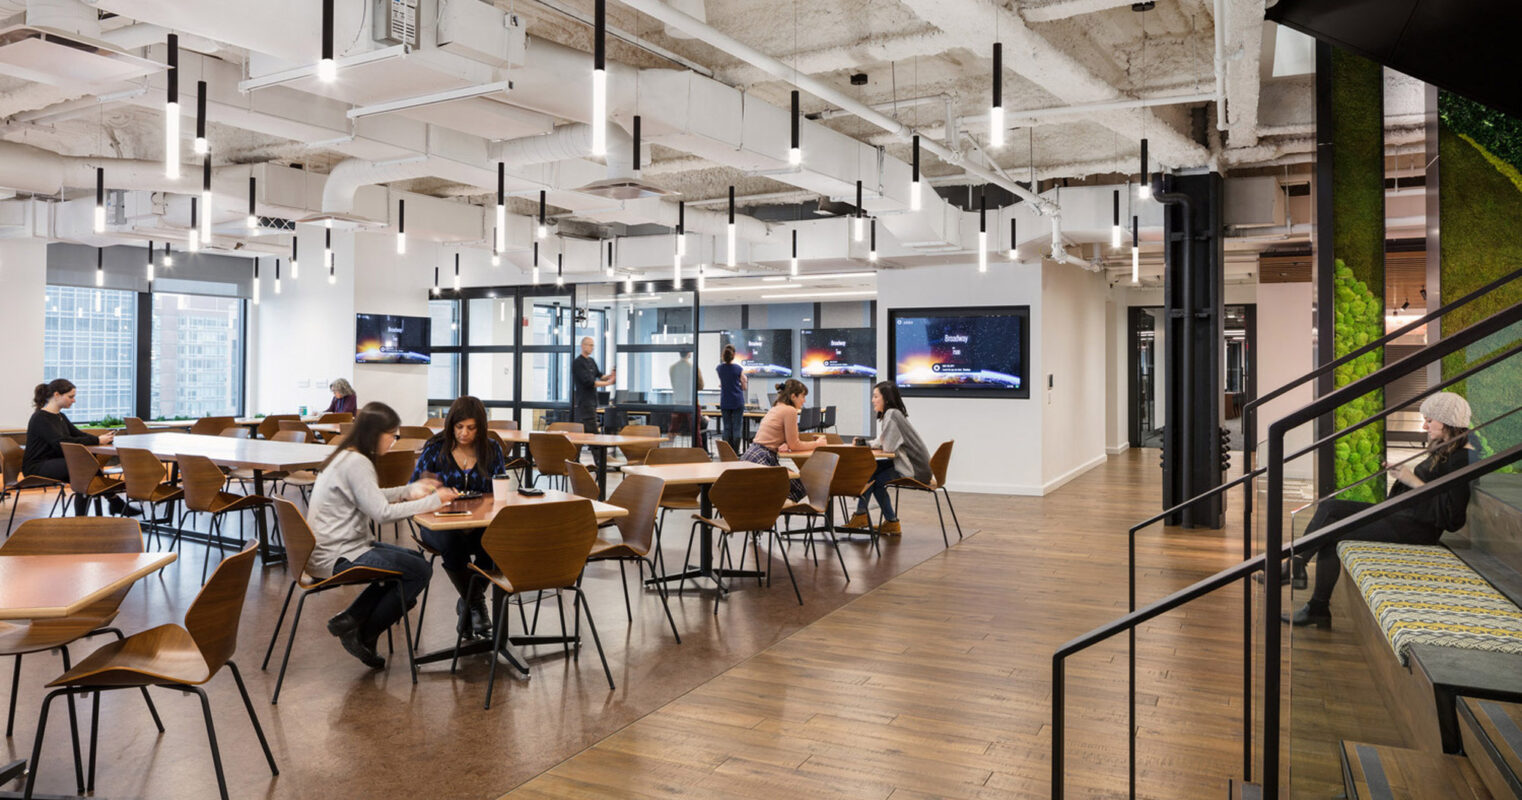 Modern office breakroom featuring an open floor plan with exposed ceilings and industrial lighting. Wooden tables and chairs provide a warm contrast to the concrete textures, while greenery adds a touch of nature to the urban space.